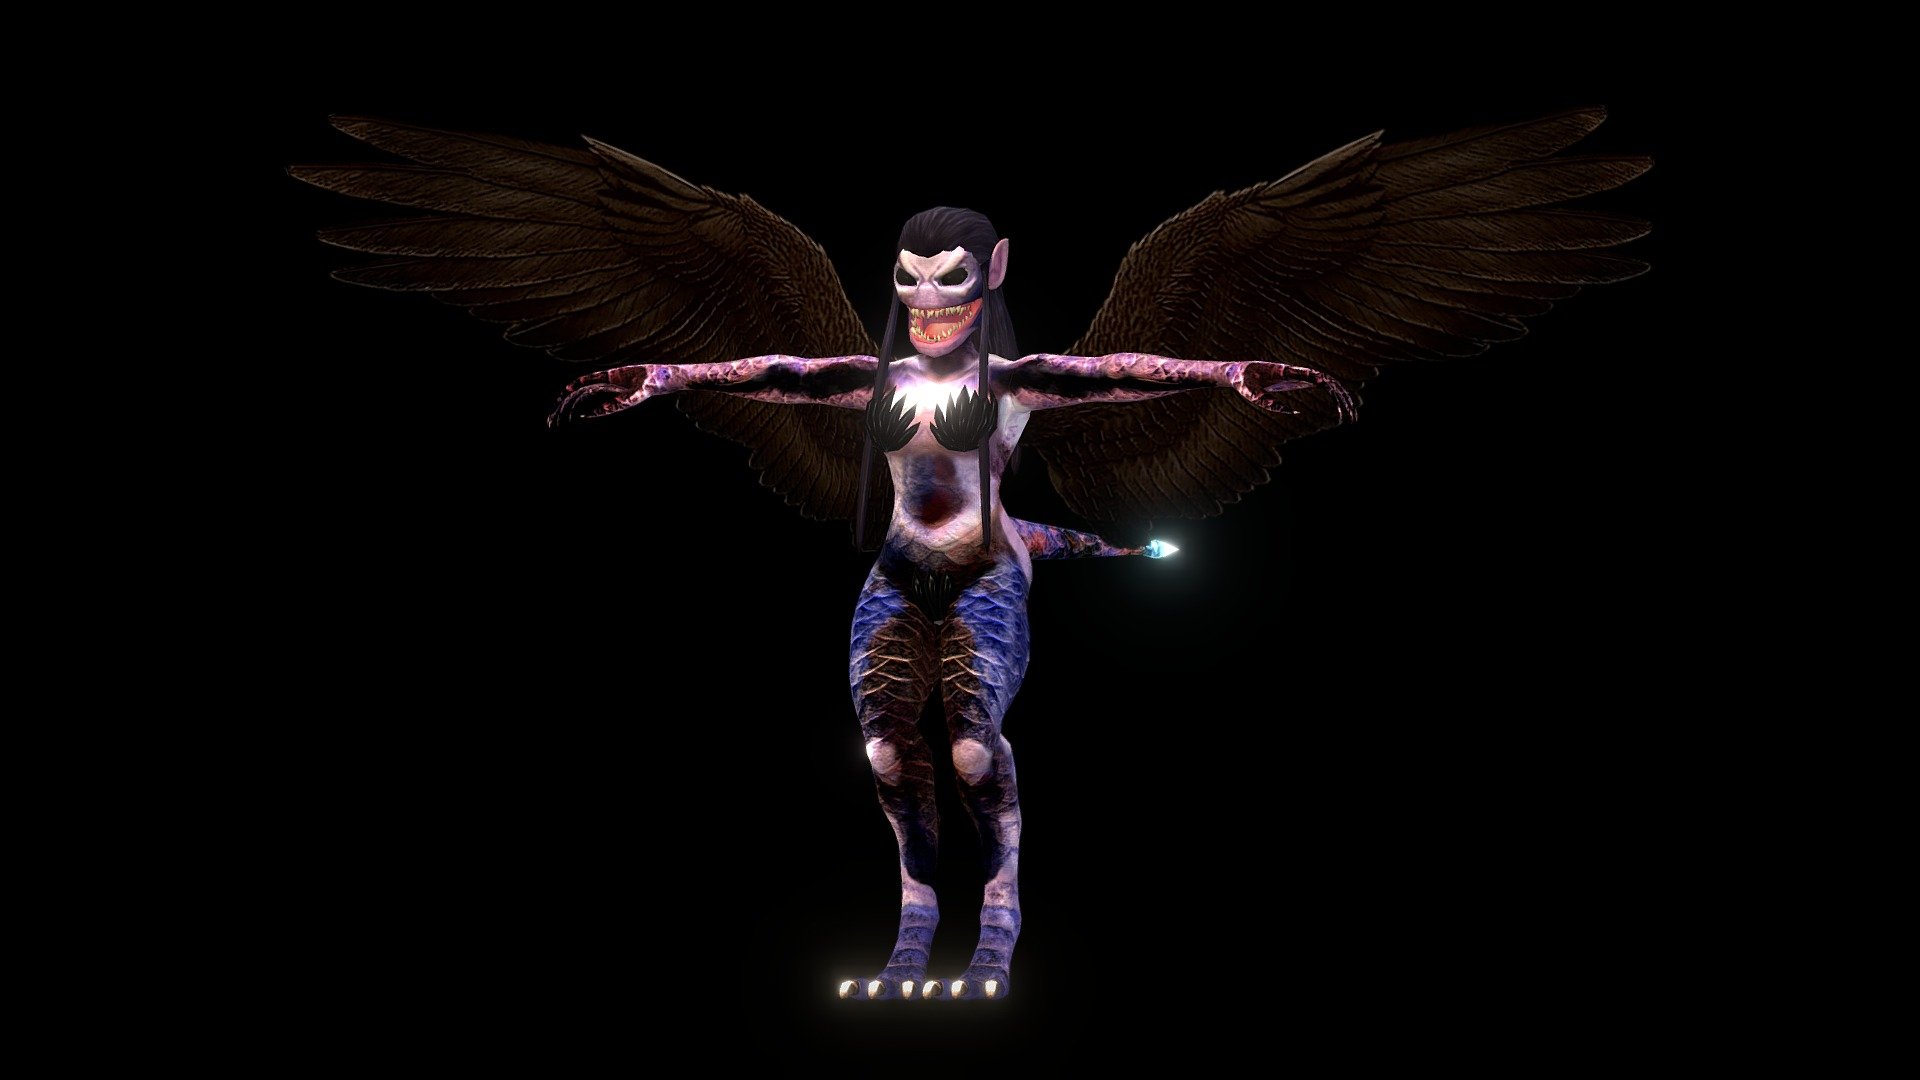 Animations for the dark wings =&gt; pose-0, idle, fly-1, fly-2, fly-3, plane-1, plane-2, block.

No animations for the harpia monster yet&hellip; Except run animation =&gt; https://sketchfab.com/3d-models/harpia-monster-a42d20e6c5d24b639d59cd41b3613ecc

I will still add more animations for her but not for now&hellip; 

Textures = albedos + metalz + emissions + NMs + AOs - Harpia Monster + Dark Wings (Rigged) - Buy Royalty Free 3D model by Leonardo Carvalho (@livrosparacriancas) 3d model